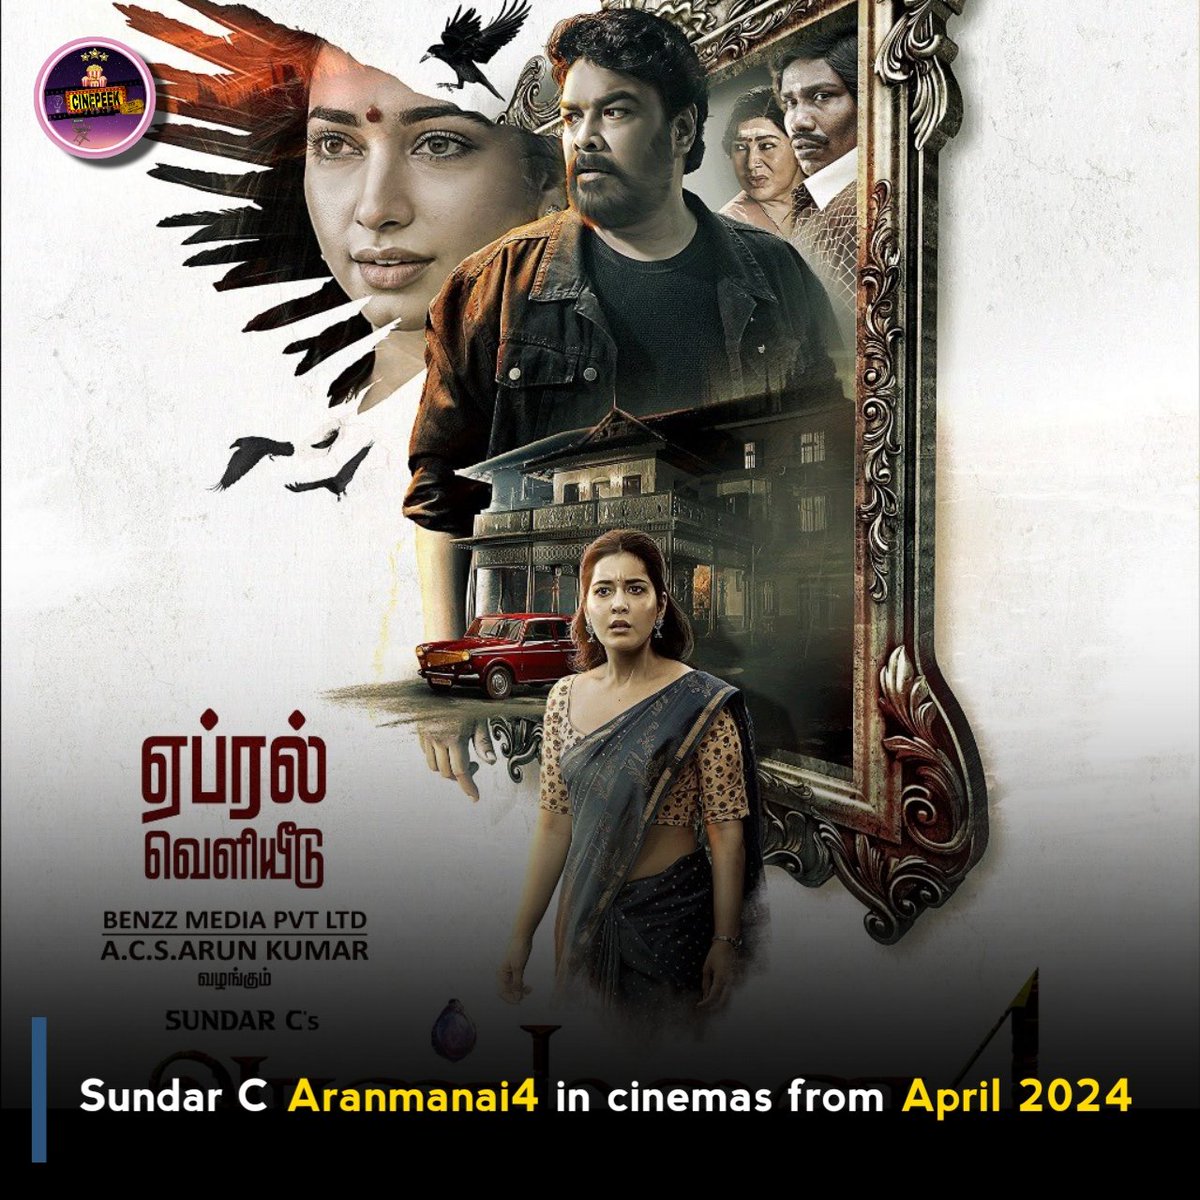 #FilmyBuzz - Summer entertainer #Aranmanai4 is coming to theatres in April 2024. Official release date announcement later this week #SundarC @hiphoptamizha #CinePeek